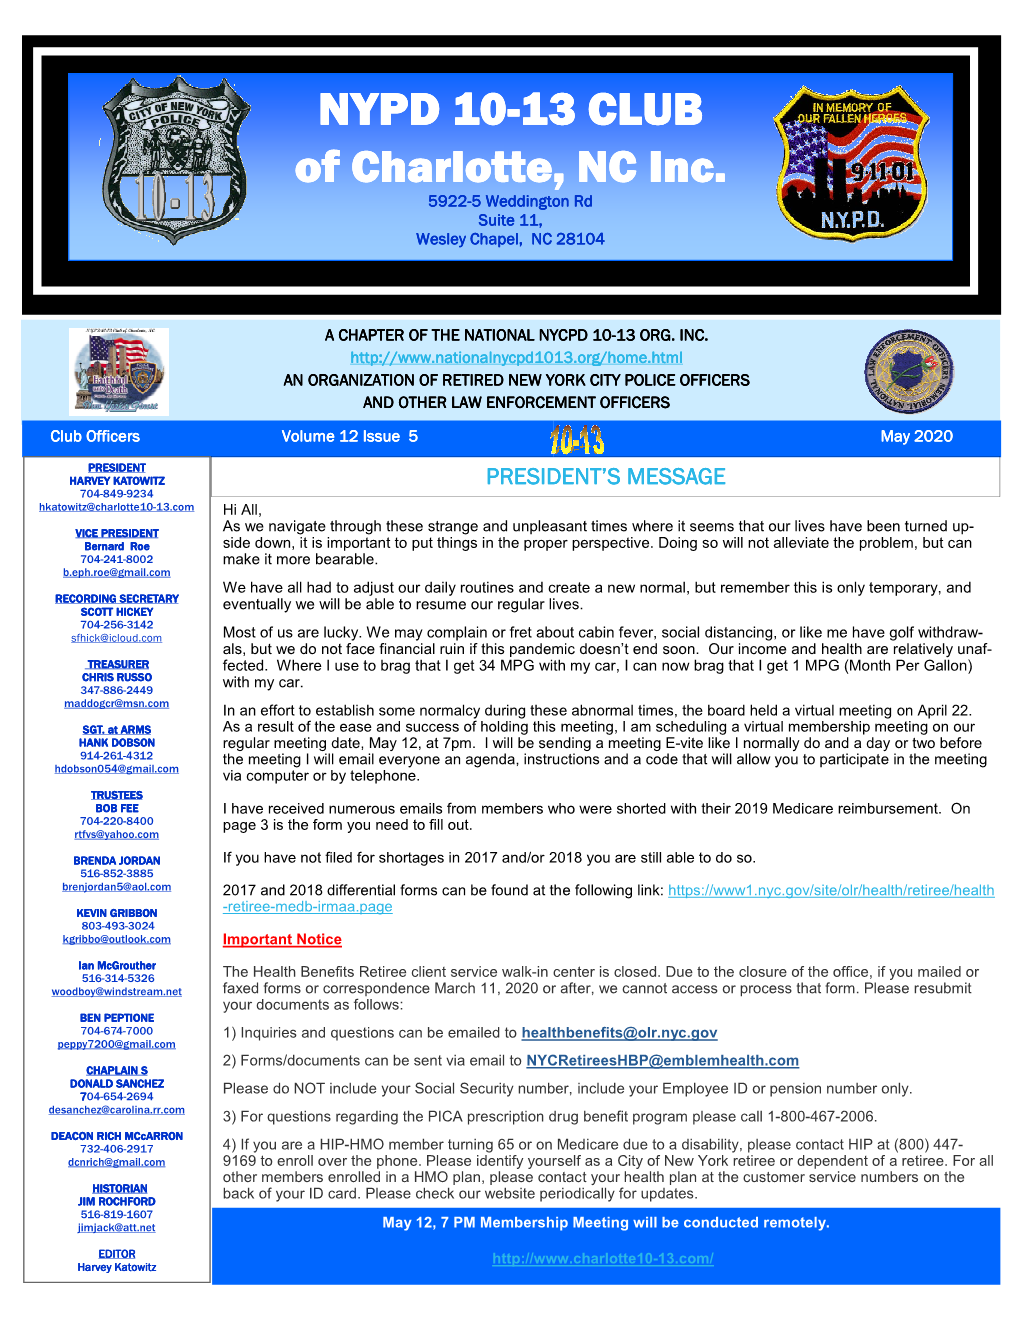 5-May 2020 10-13 Club Newsletter